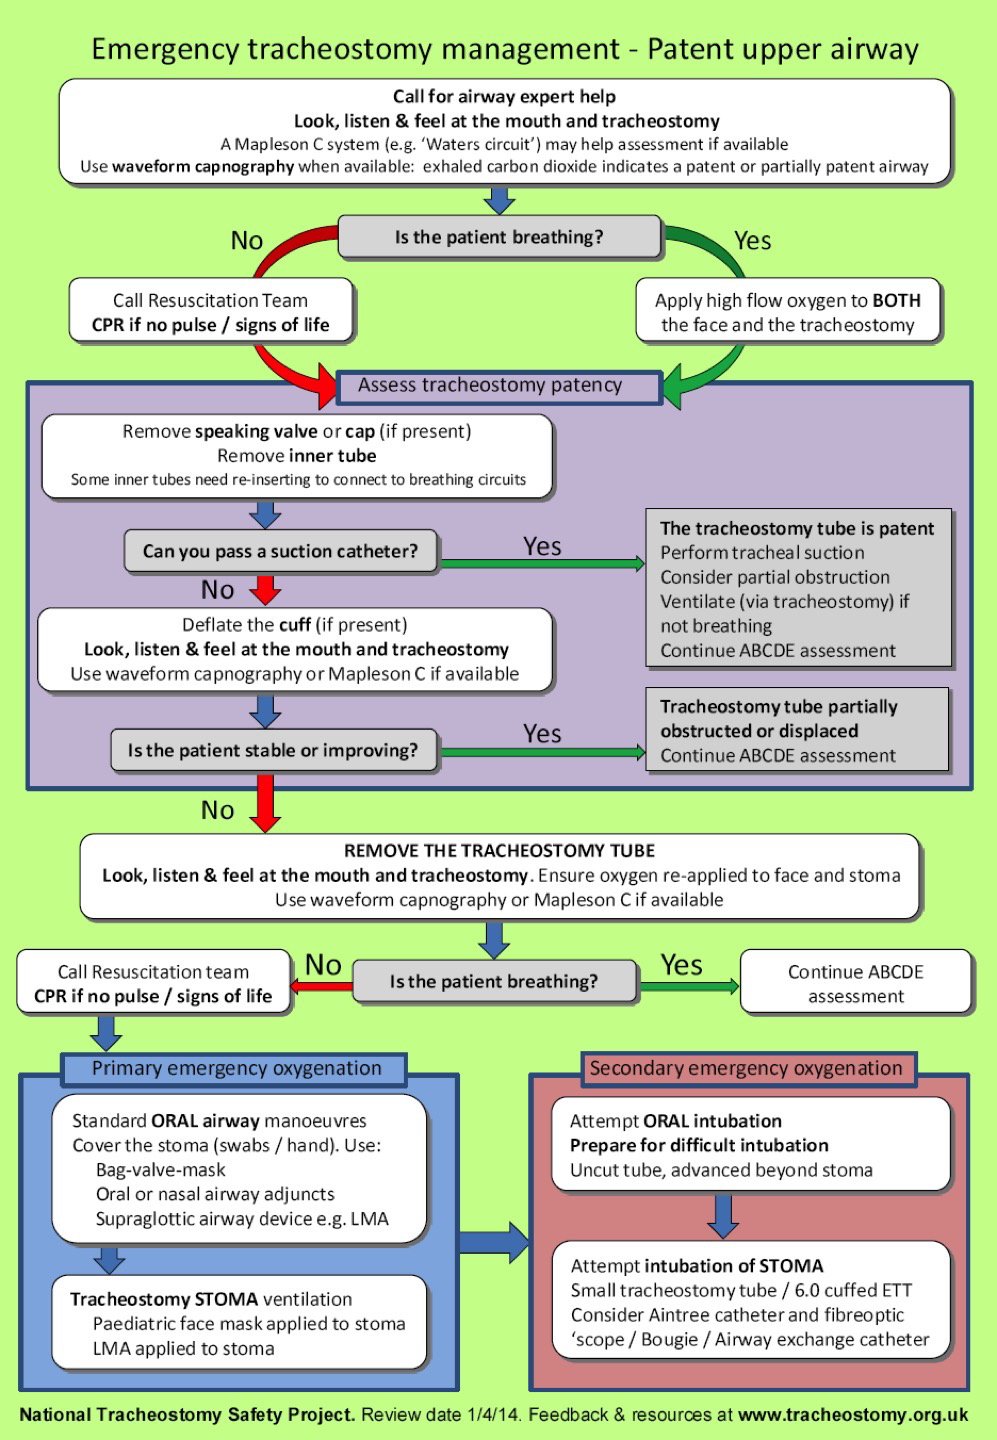 NTSP Algorithm for emergencies in patients with a tracheostomy